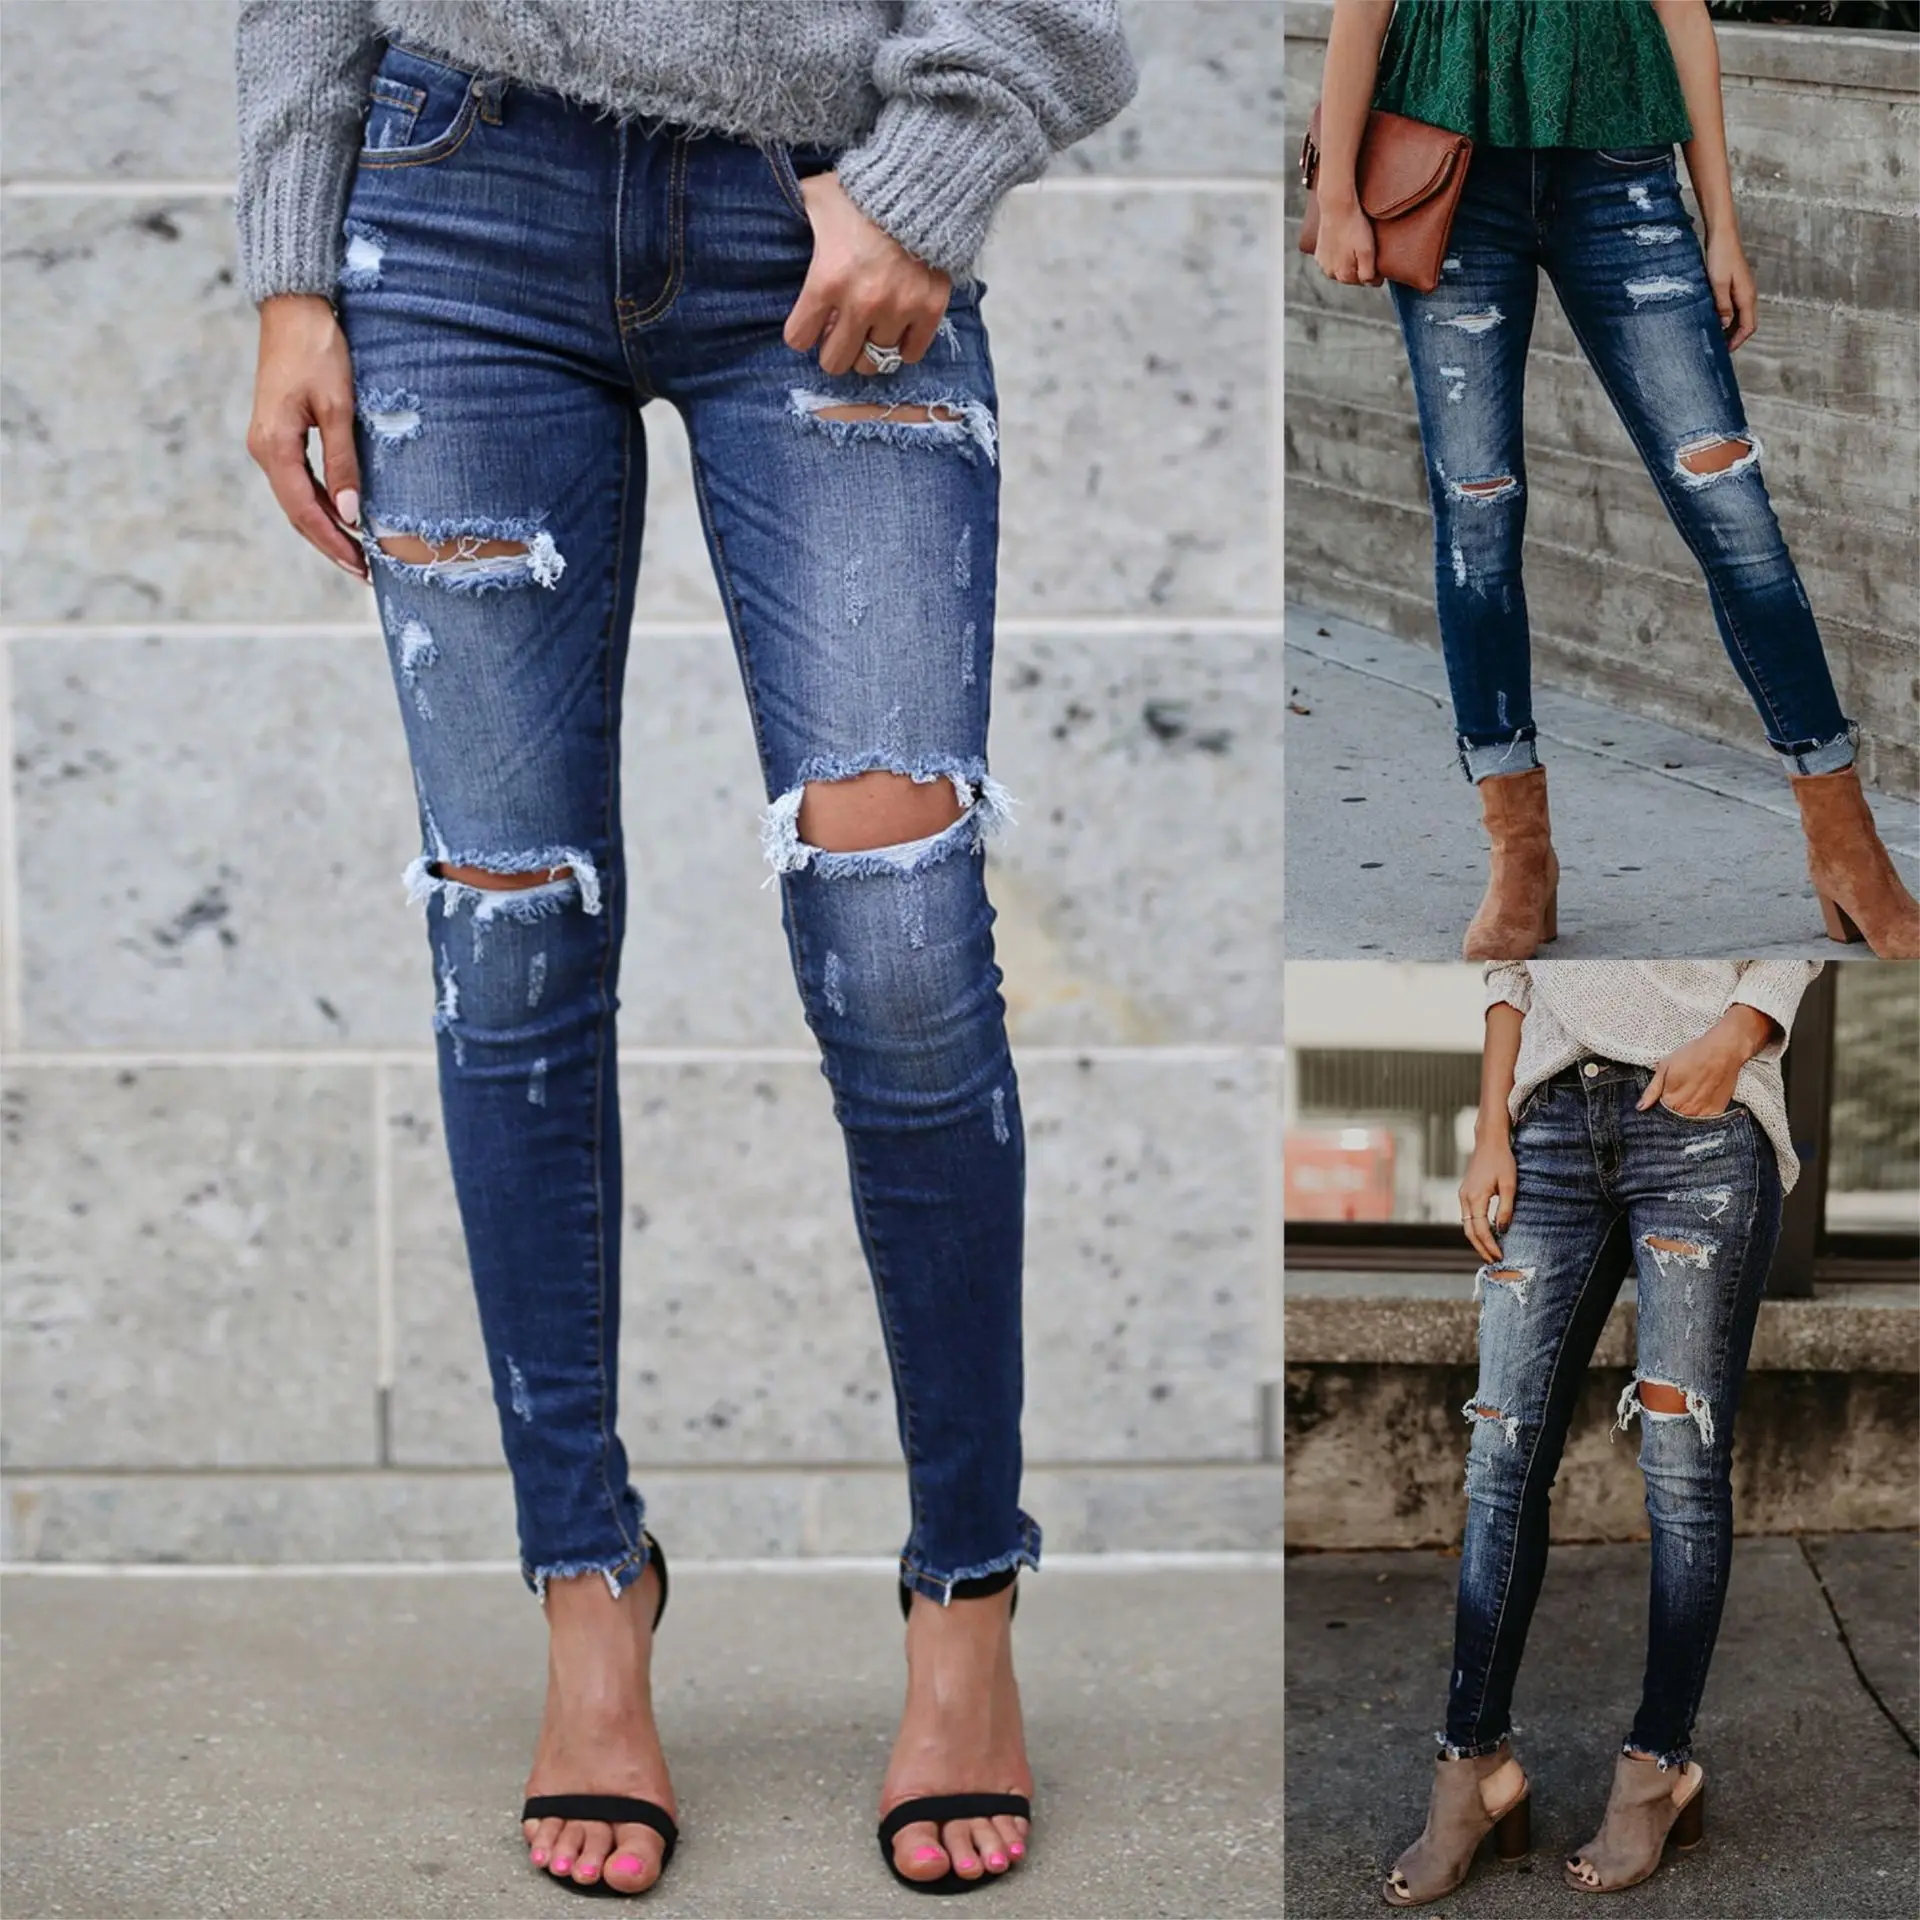 

Women Denim Skinny Trousers High Waist Jeans Destroyed Knee Holes Pencil Pants Trousers Stretch Ripped Boyfriend Female